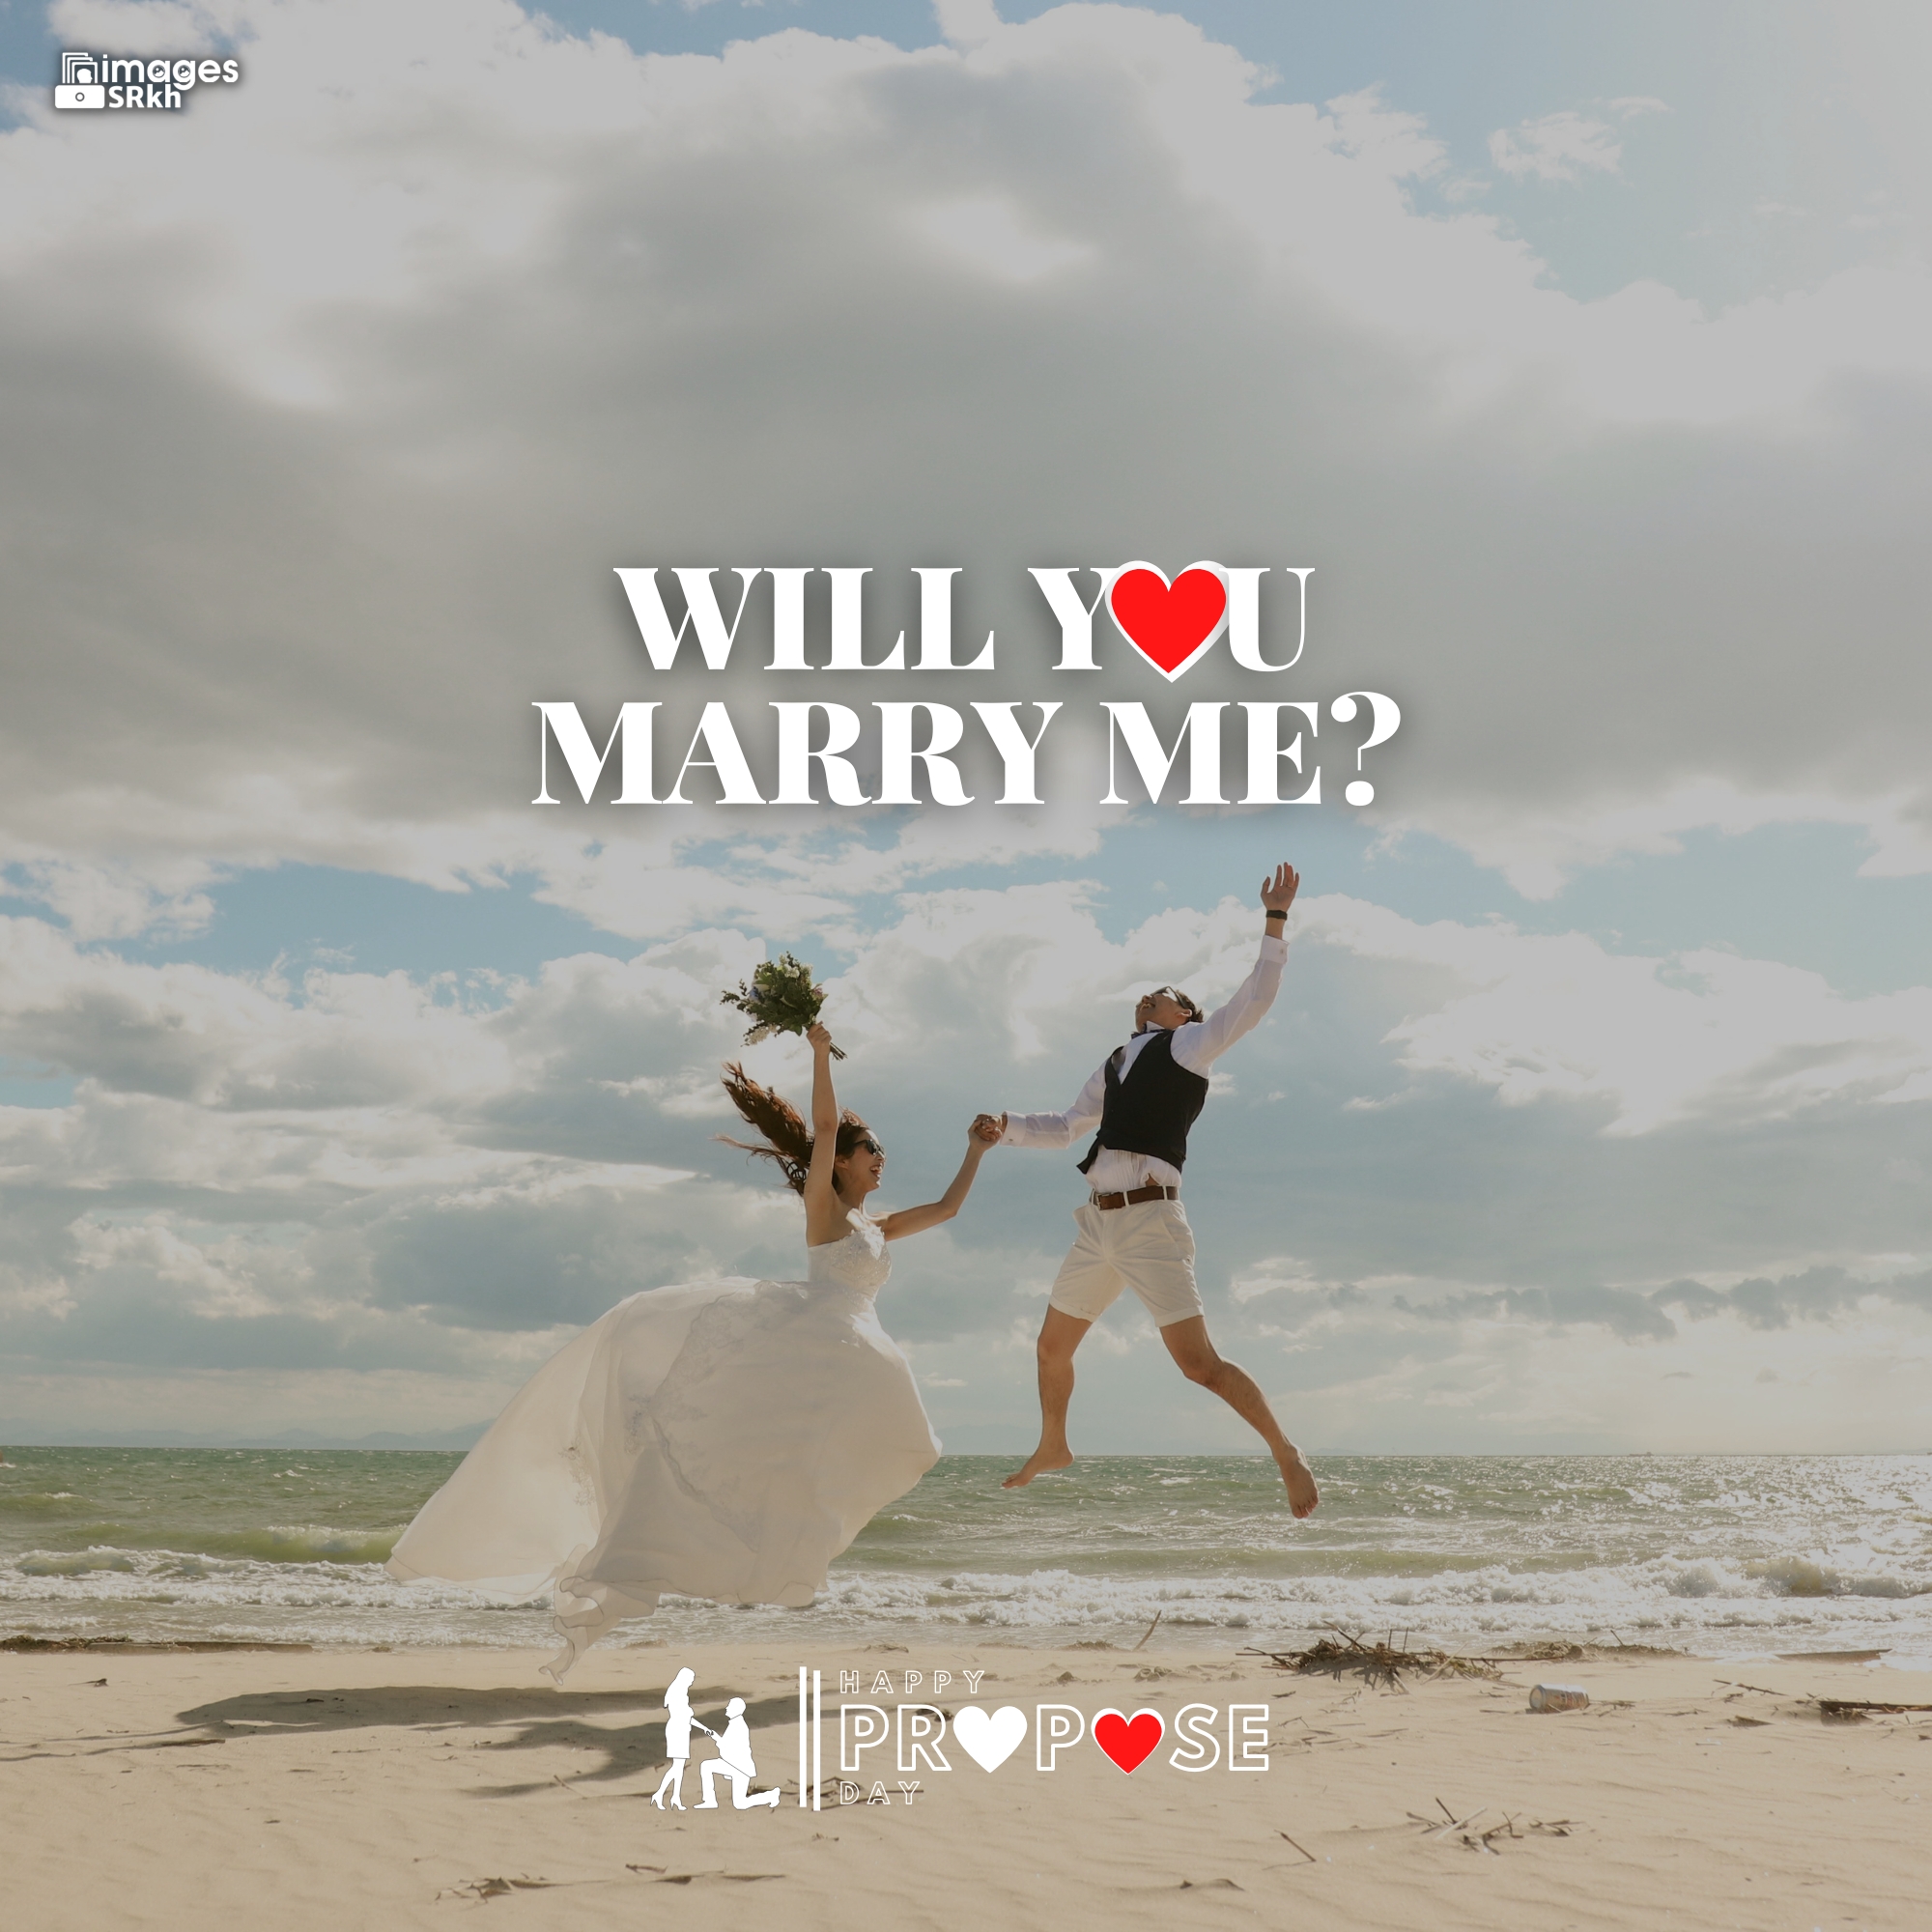 Propose Day Images | 281 | Will You MARRY ME